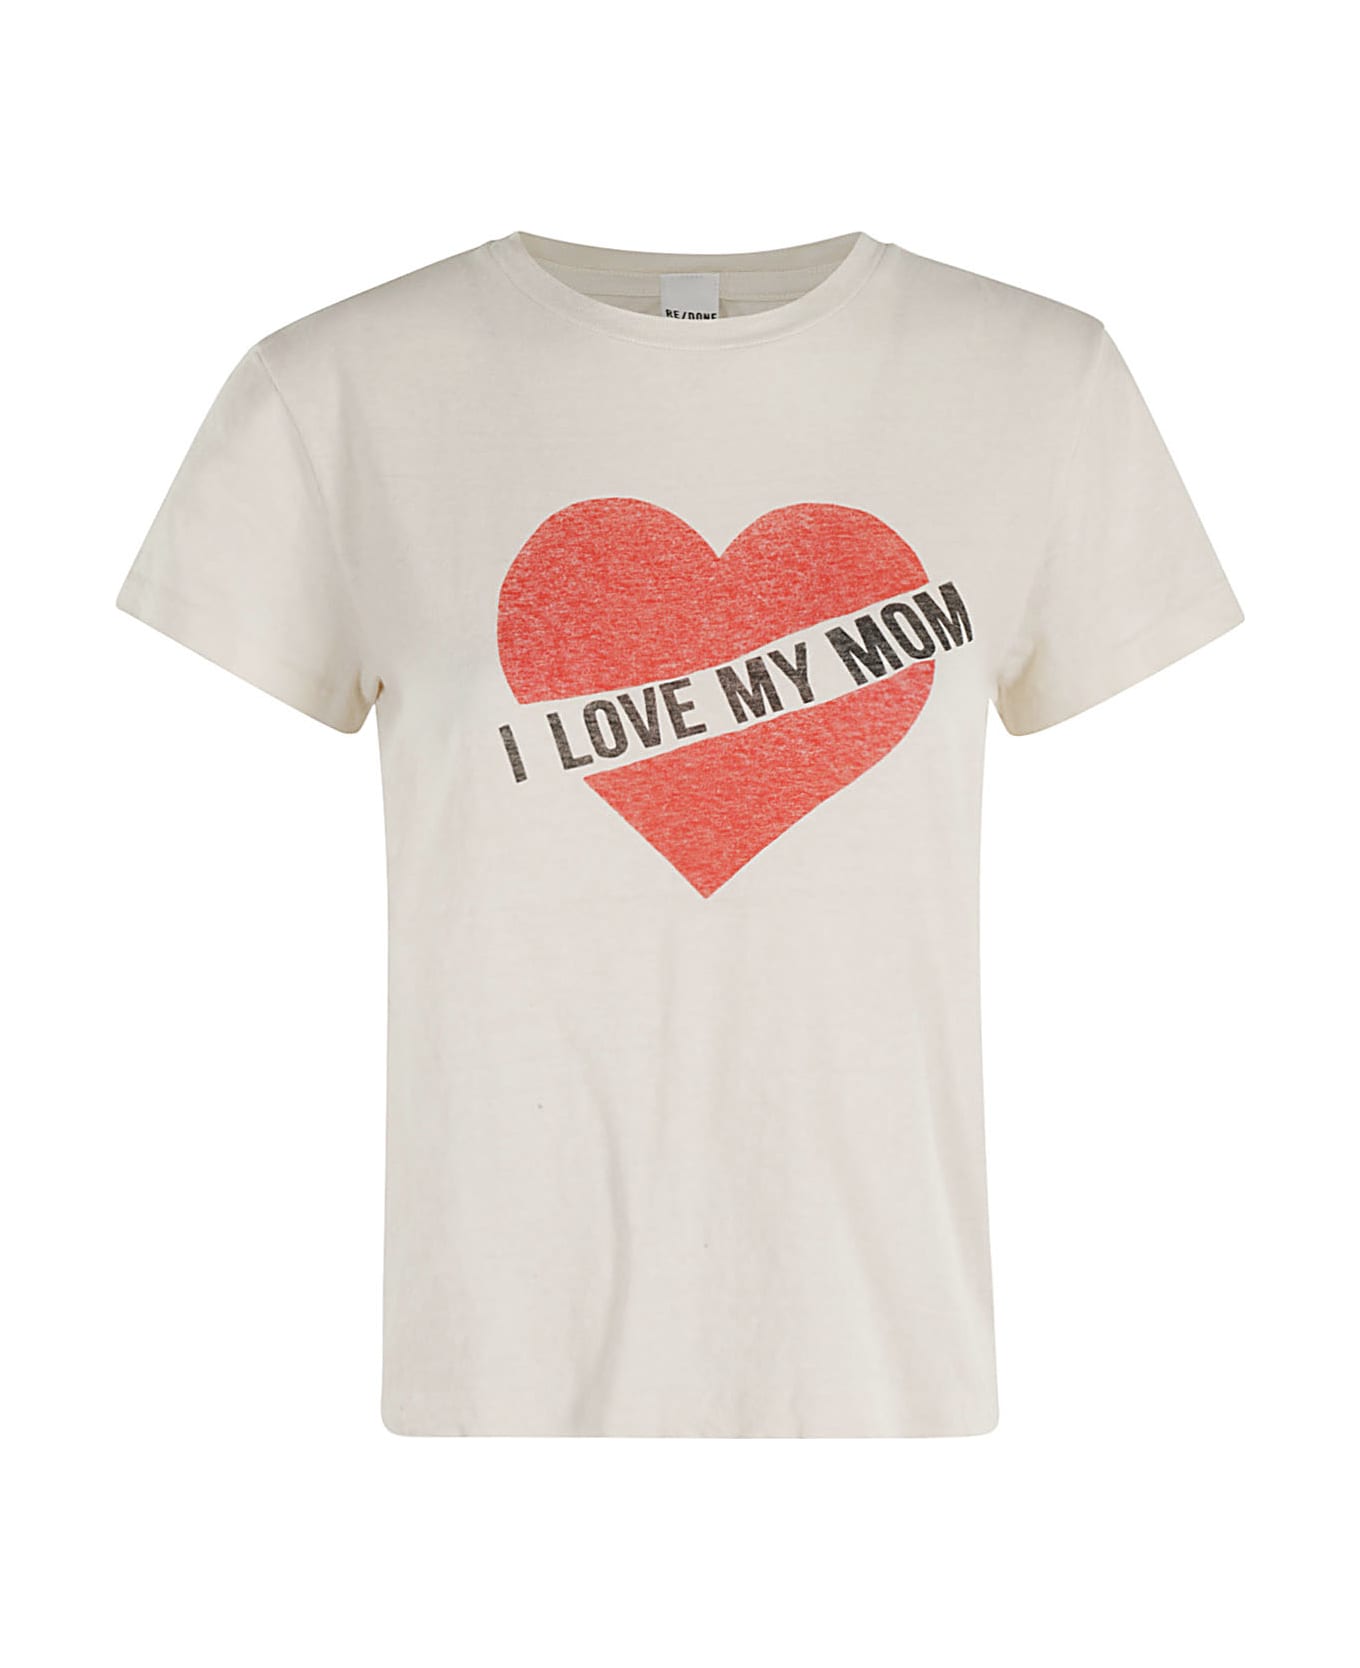 RE/DONE Classic Tee I Love My Mom - Vintage White